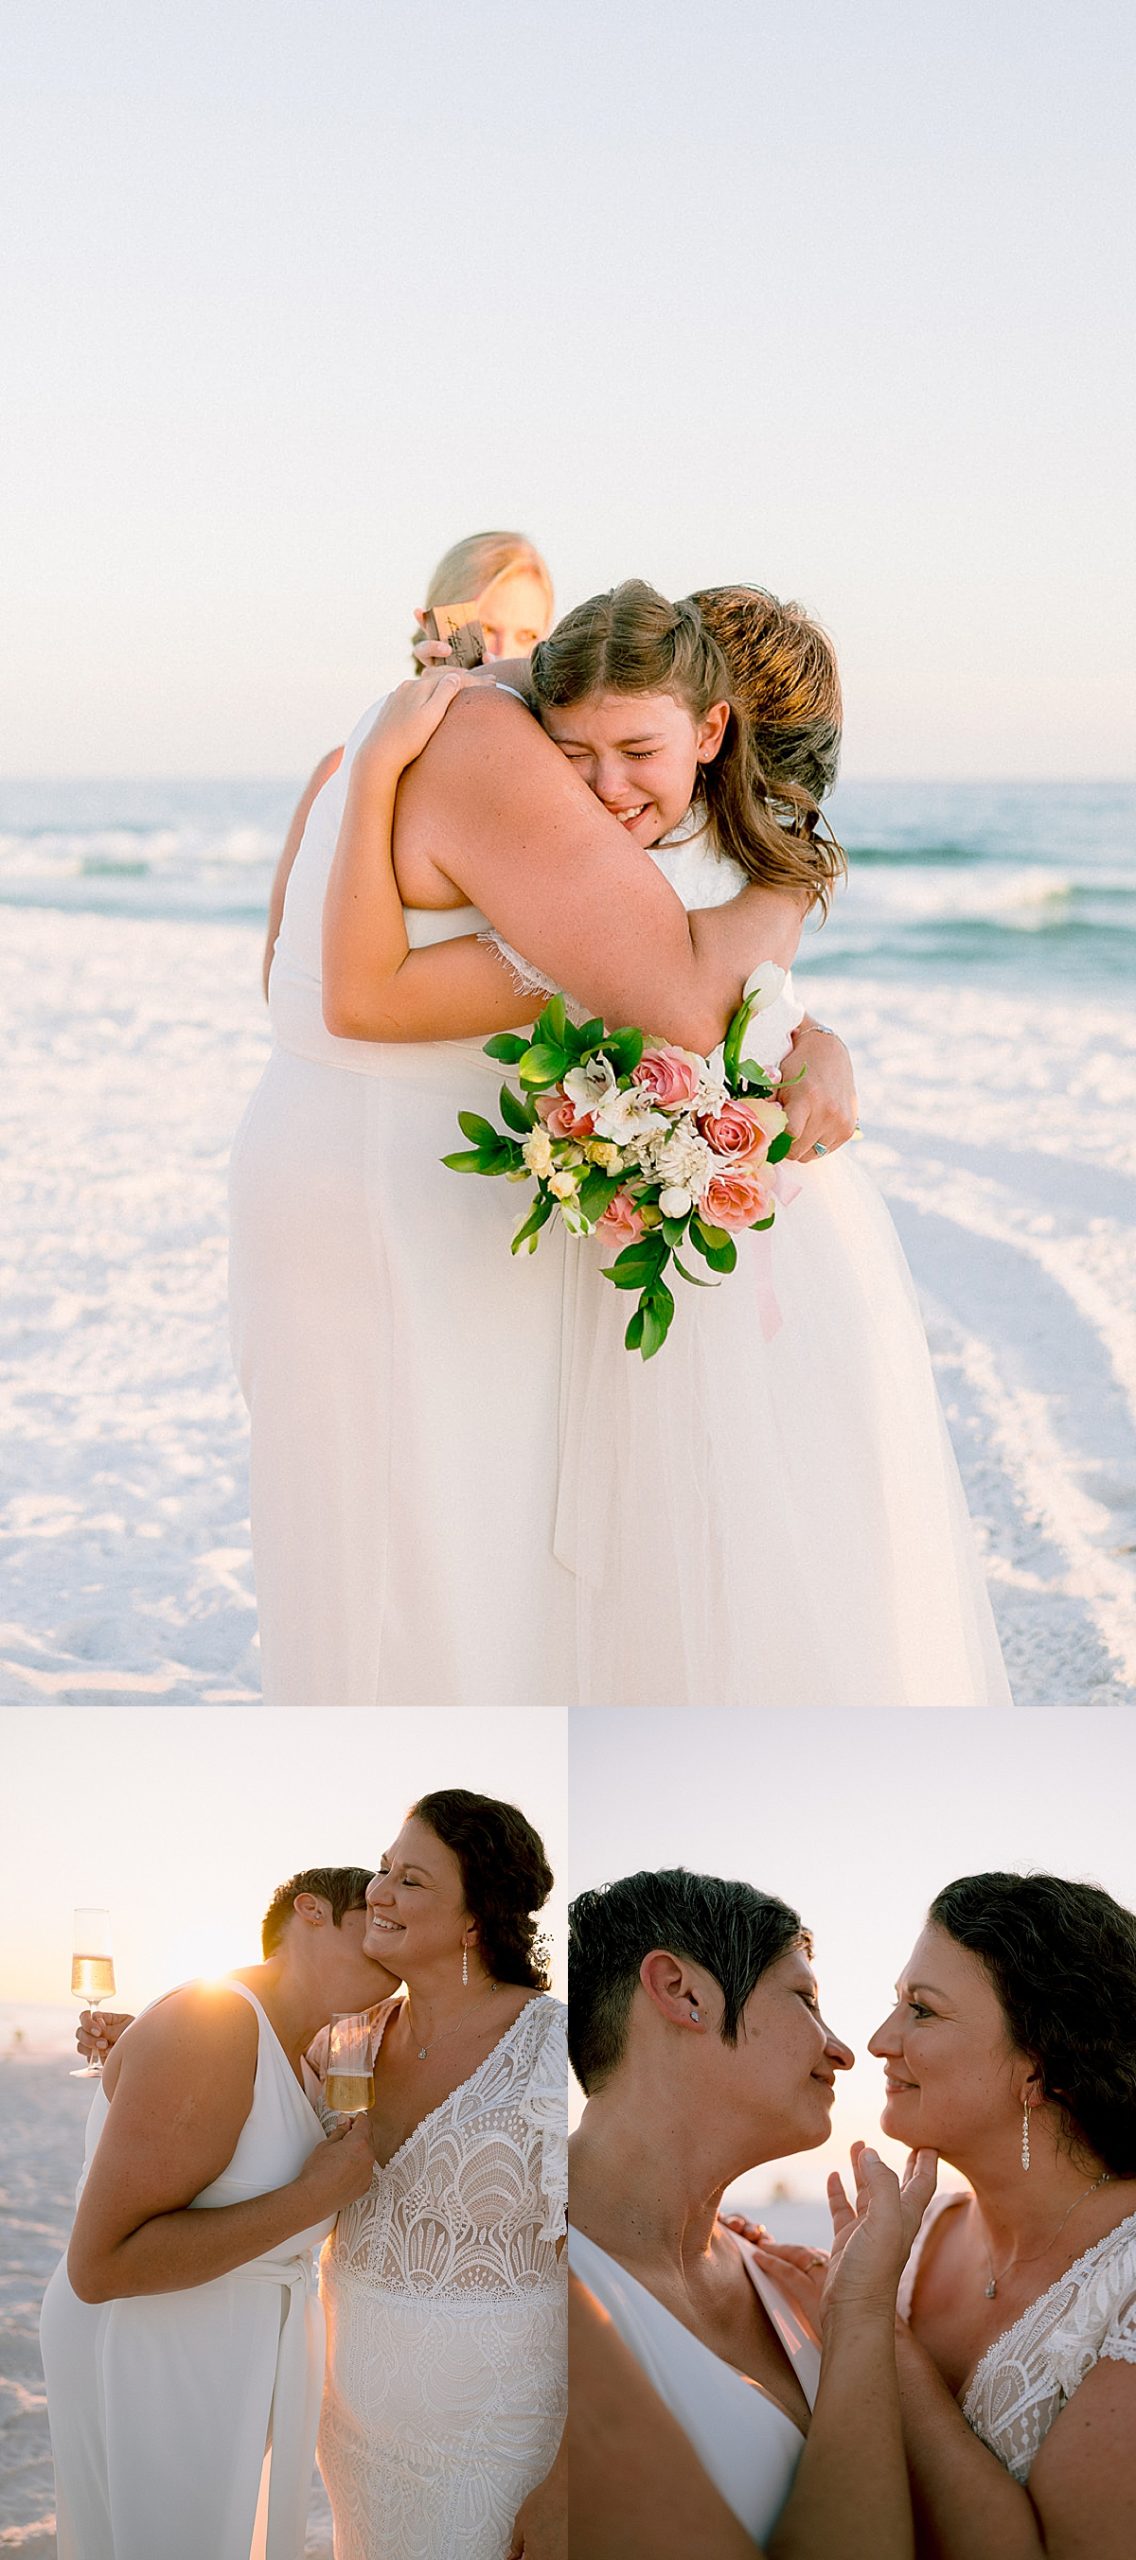 Emotional moment with mother and daughter at wedding after ceremony with destination wedding photographer